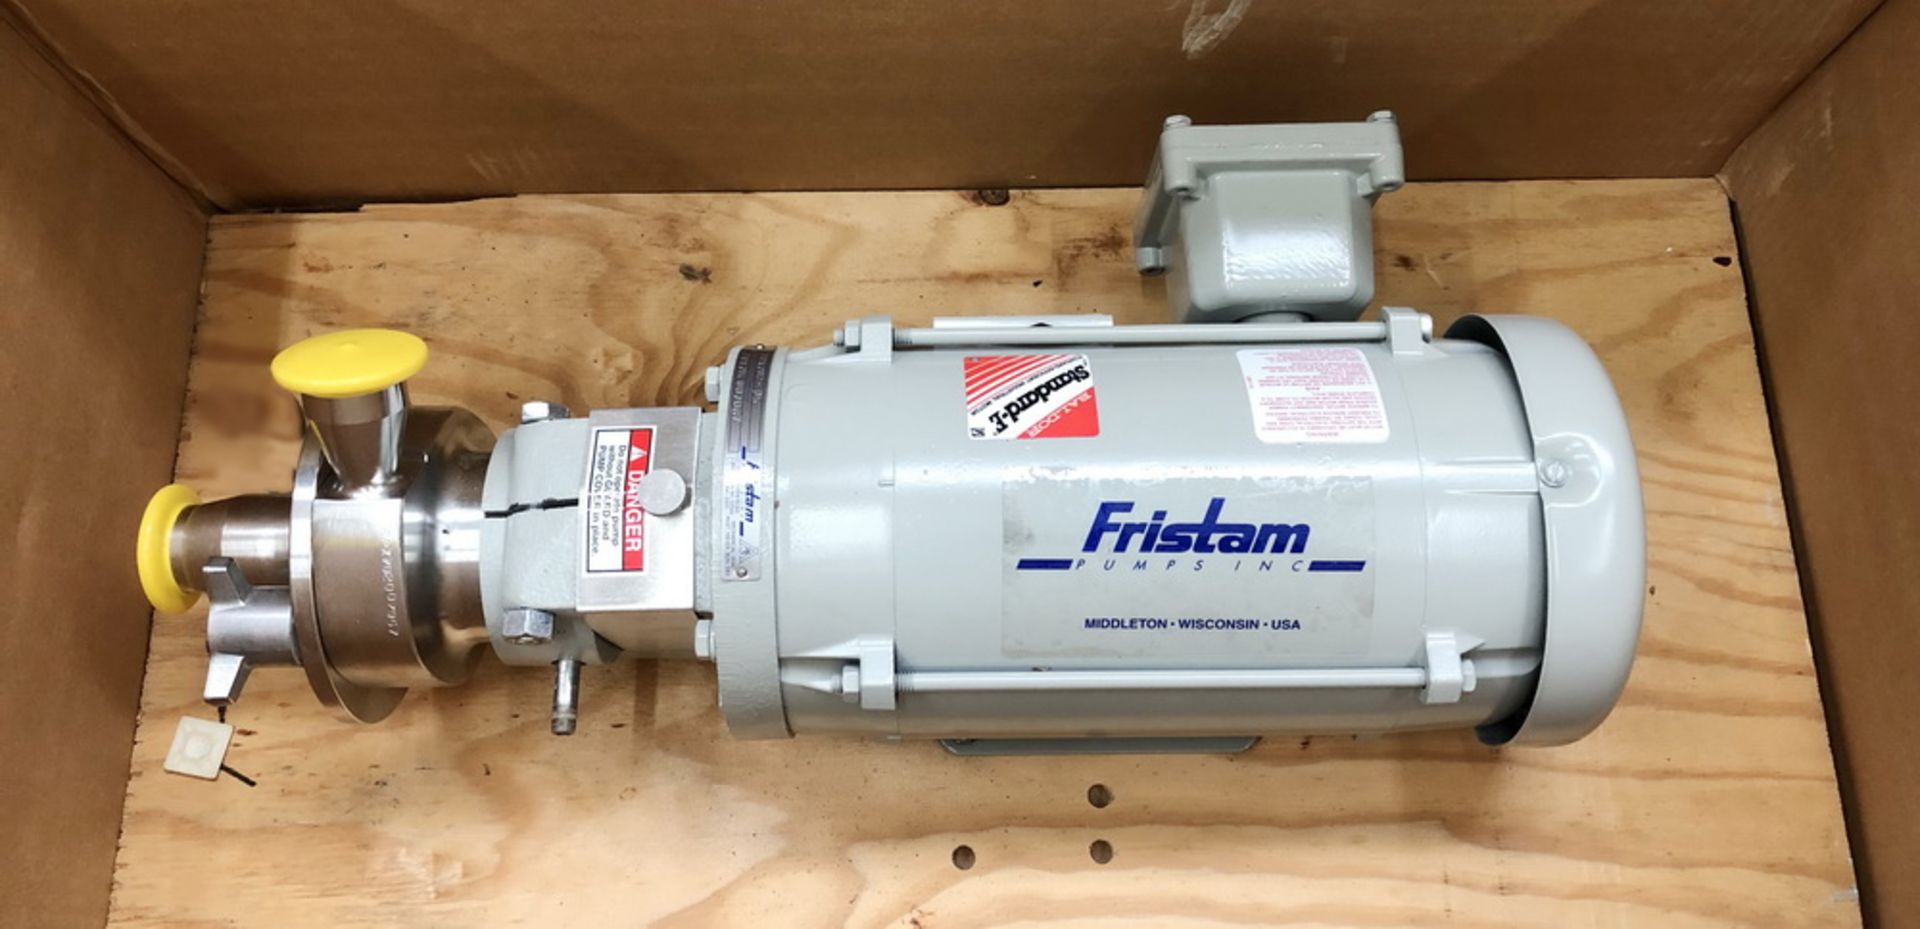 New, in box, Fristam 316SS Centrifugal Pump, Model FPX702-95, S/N FPX 702007067